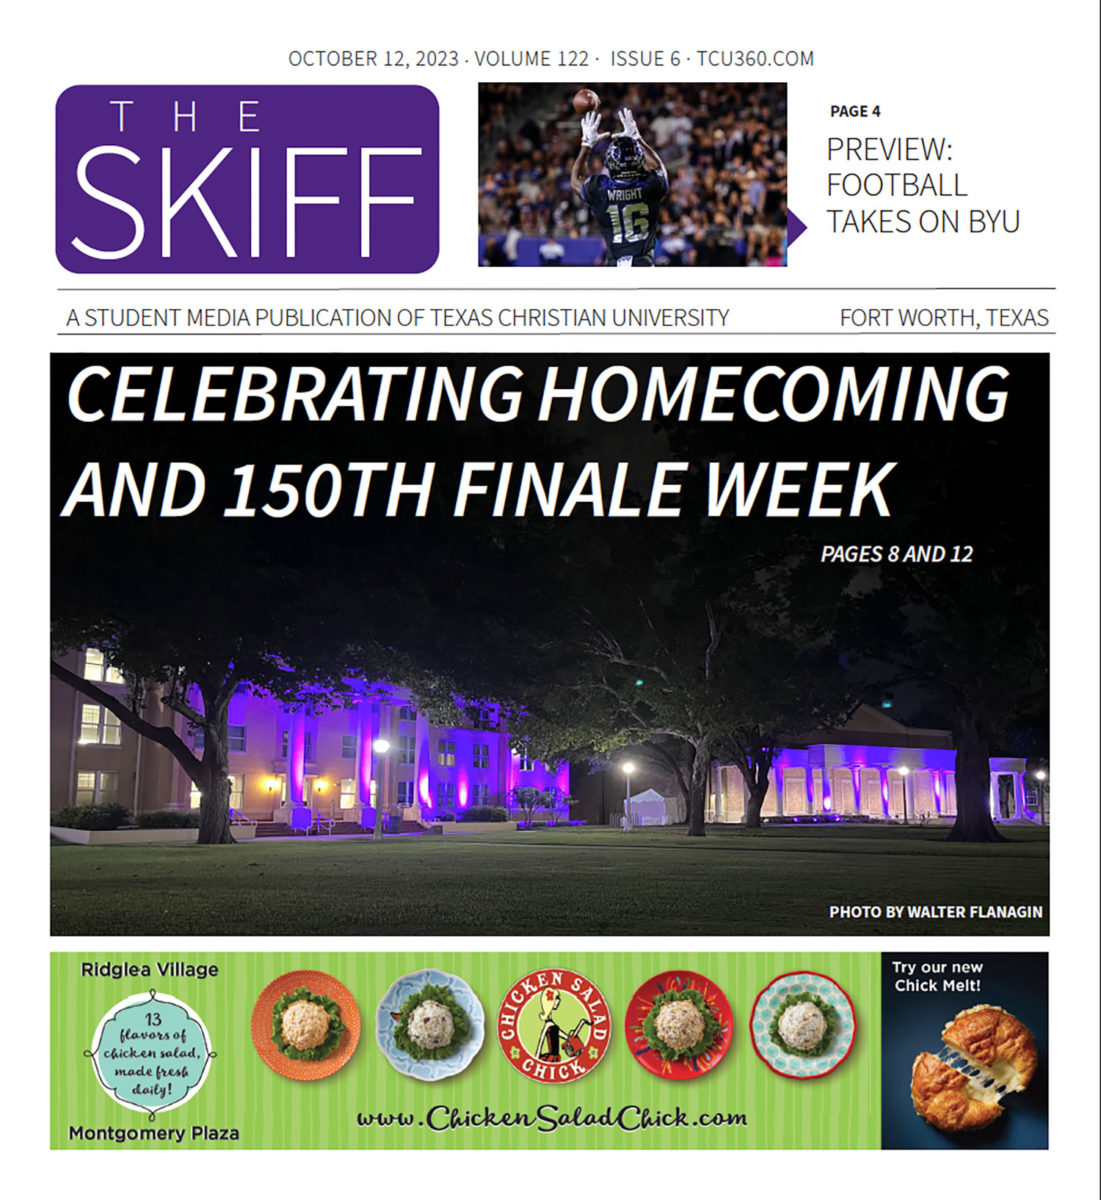 The Skiff: Homecoming, 150th Finale weeks